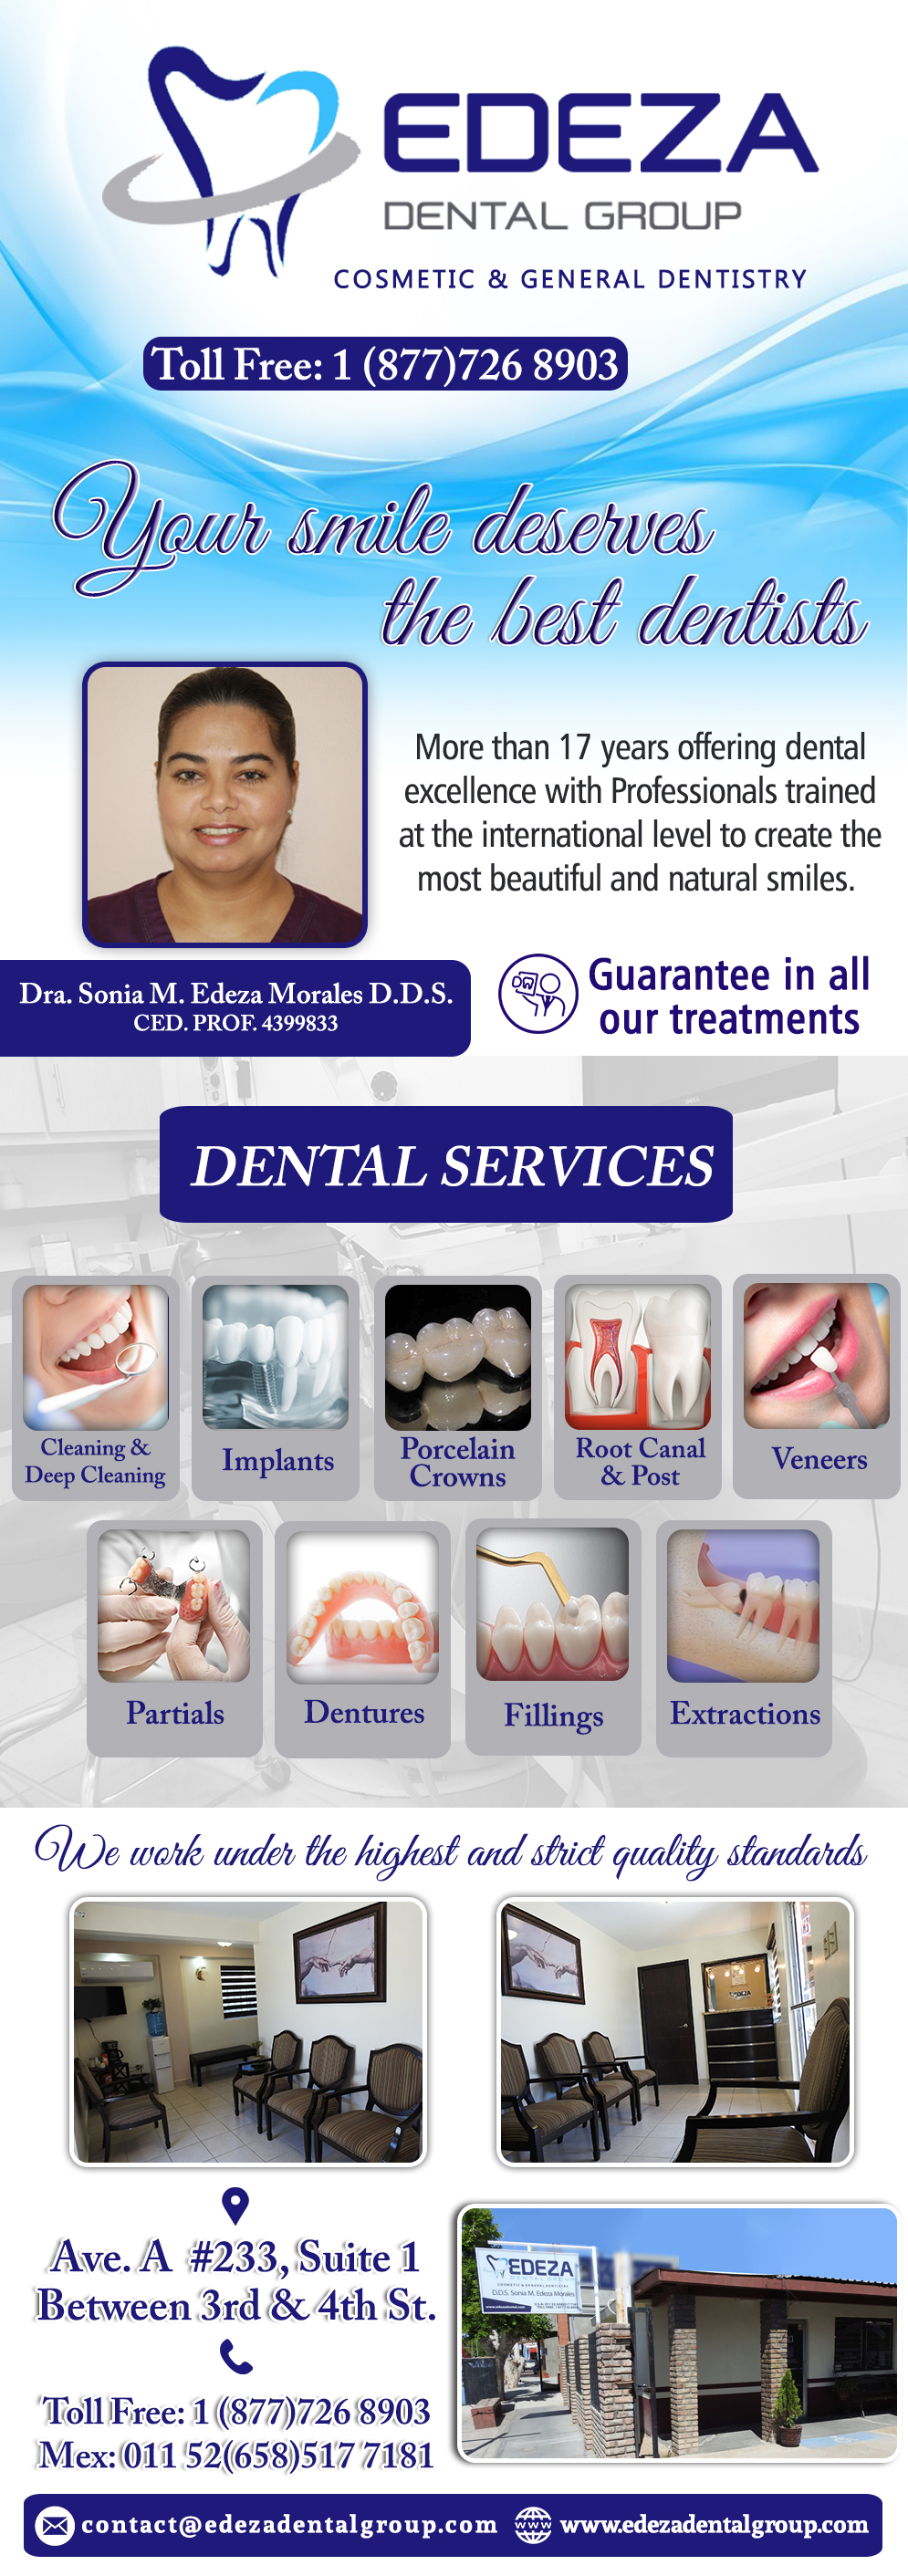 EDEZA DENTAL GROUP  Dra. Sonia M. Edeza Morales DDS-Dra. Sonia Edeza DDS Your 
Smile deserves the best dentists...
More than 17 years offering dental excellence with
Professionals trained at the international level to
Create the most beautiful and natural smiles. SERVICES: Teeth Cleaning, Deep Cleaning, Extractions, Fillings, Root Canal, Post, Porcelain Crowns, Jackets, Veeners, Dentures, Partials, Implants.                            